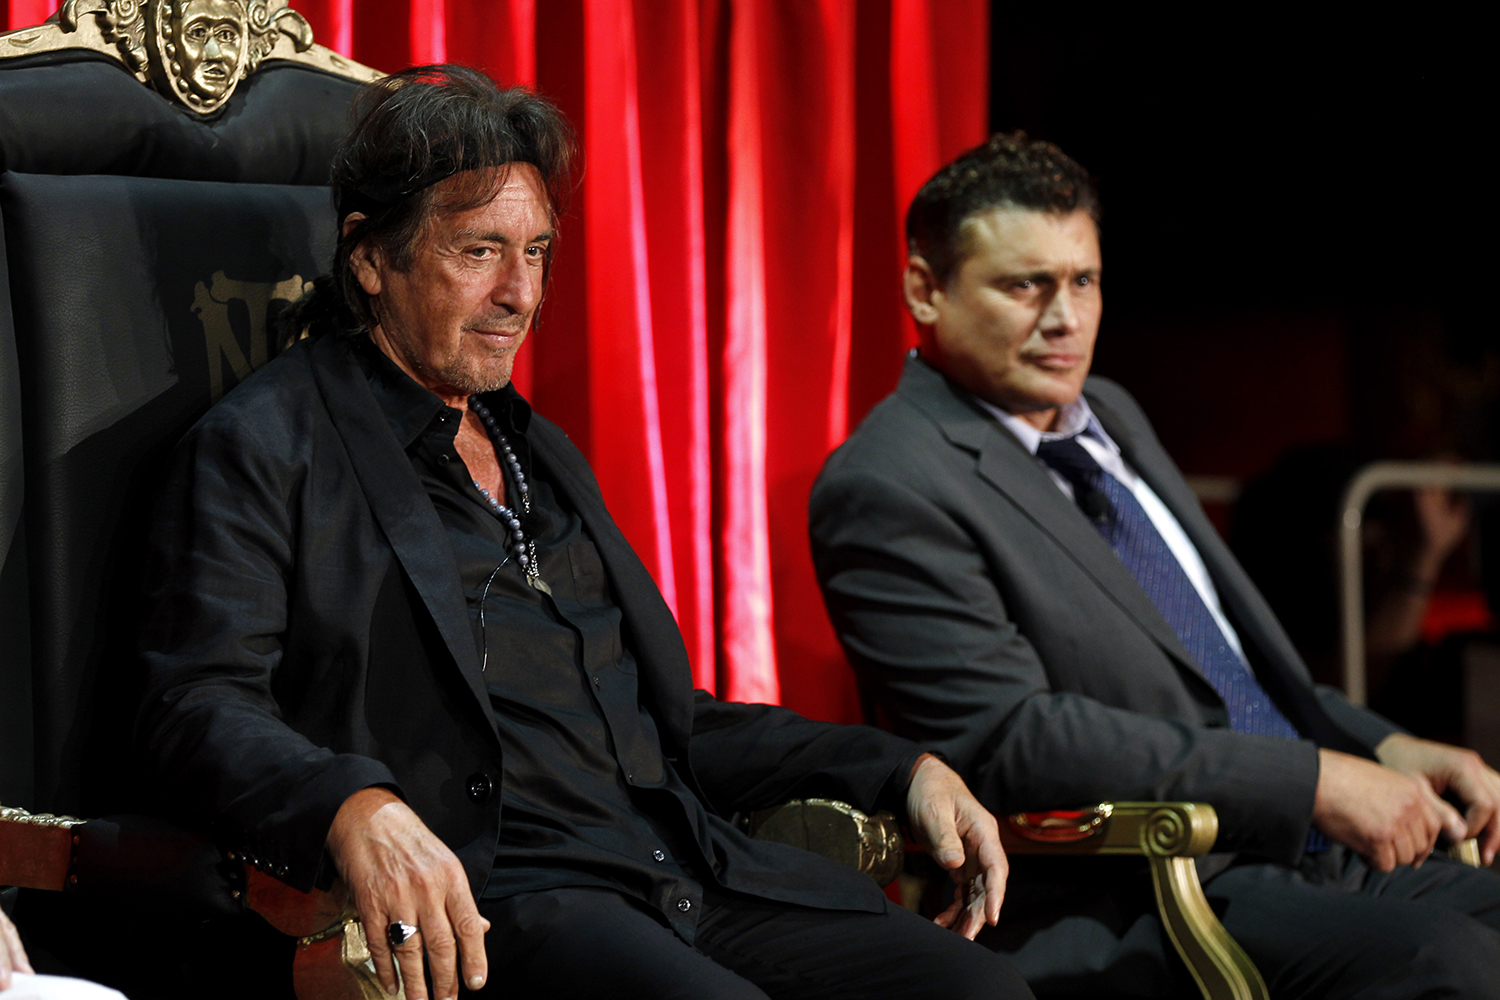 Actors Al Pacino and Steven Bauer at a Scarface event